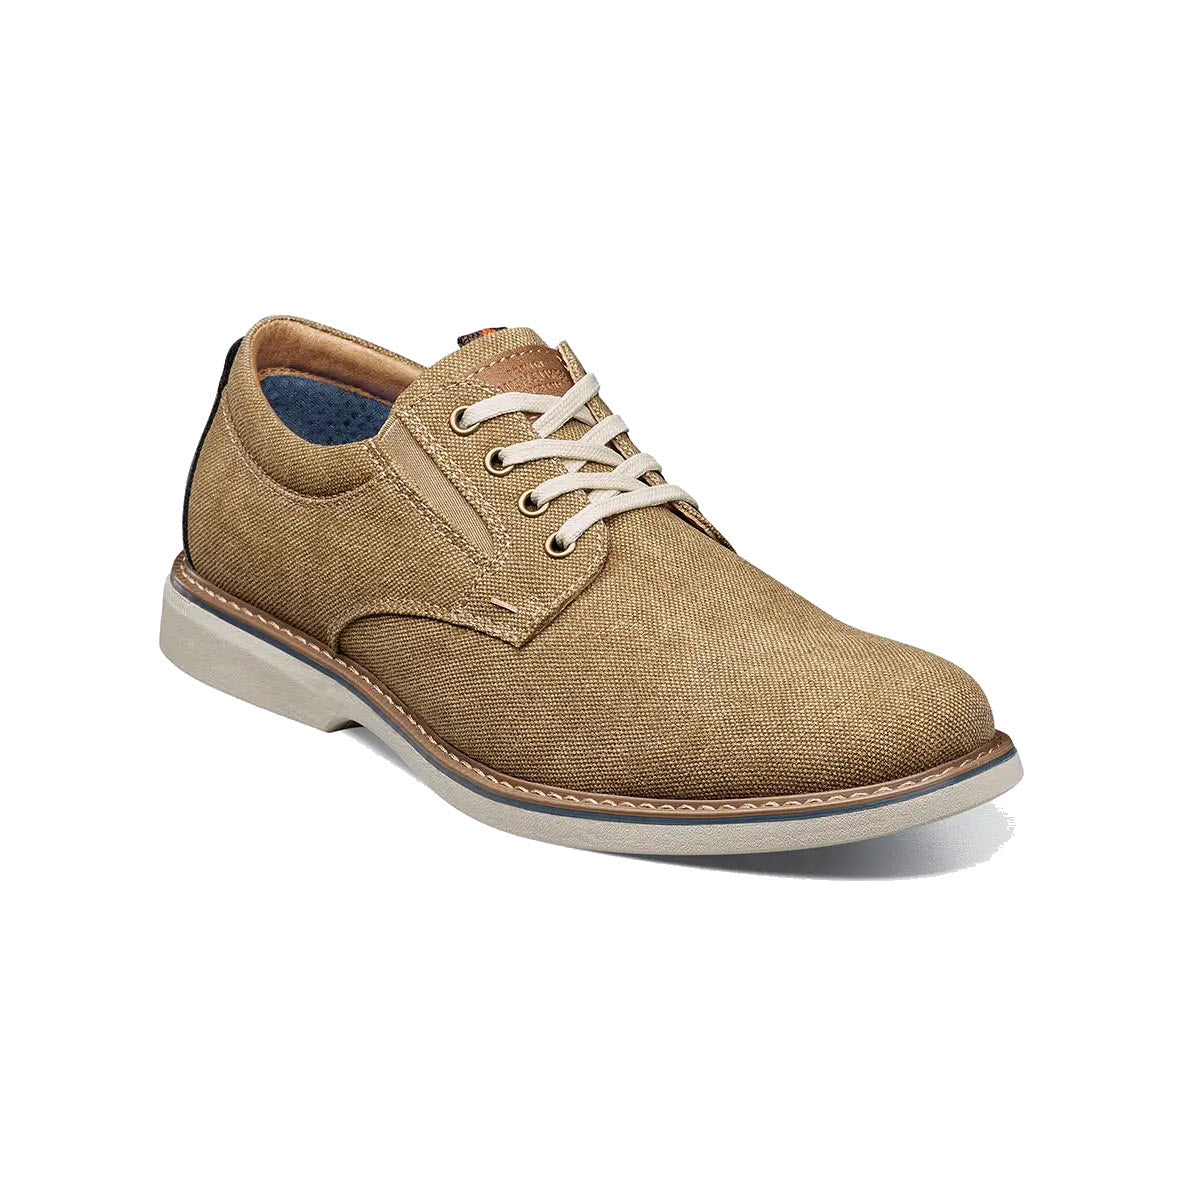 A single beige Nunn Bush Otto canvas plain toe Oxford khaki shoe with white laces and a contrasting white sole, displayed on a white background.